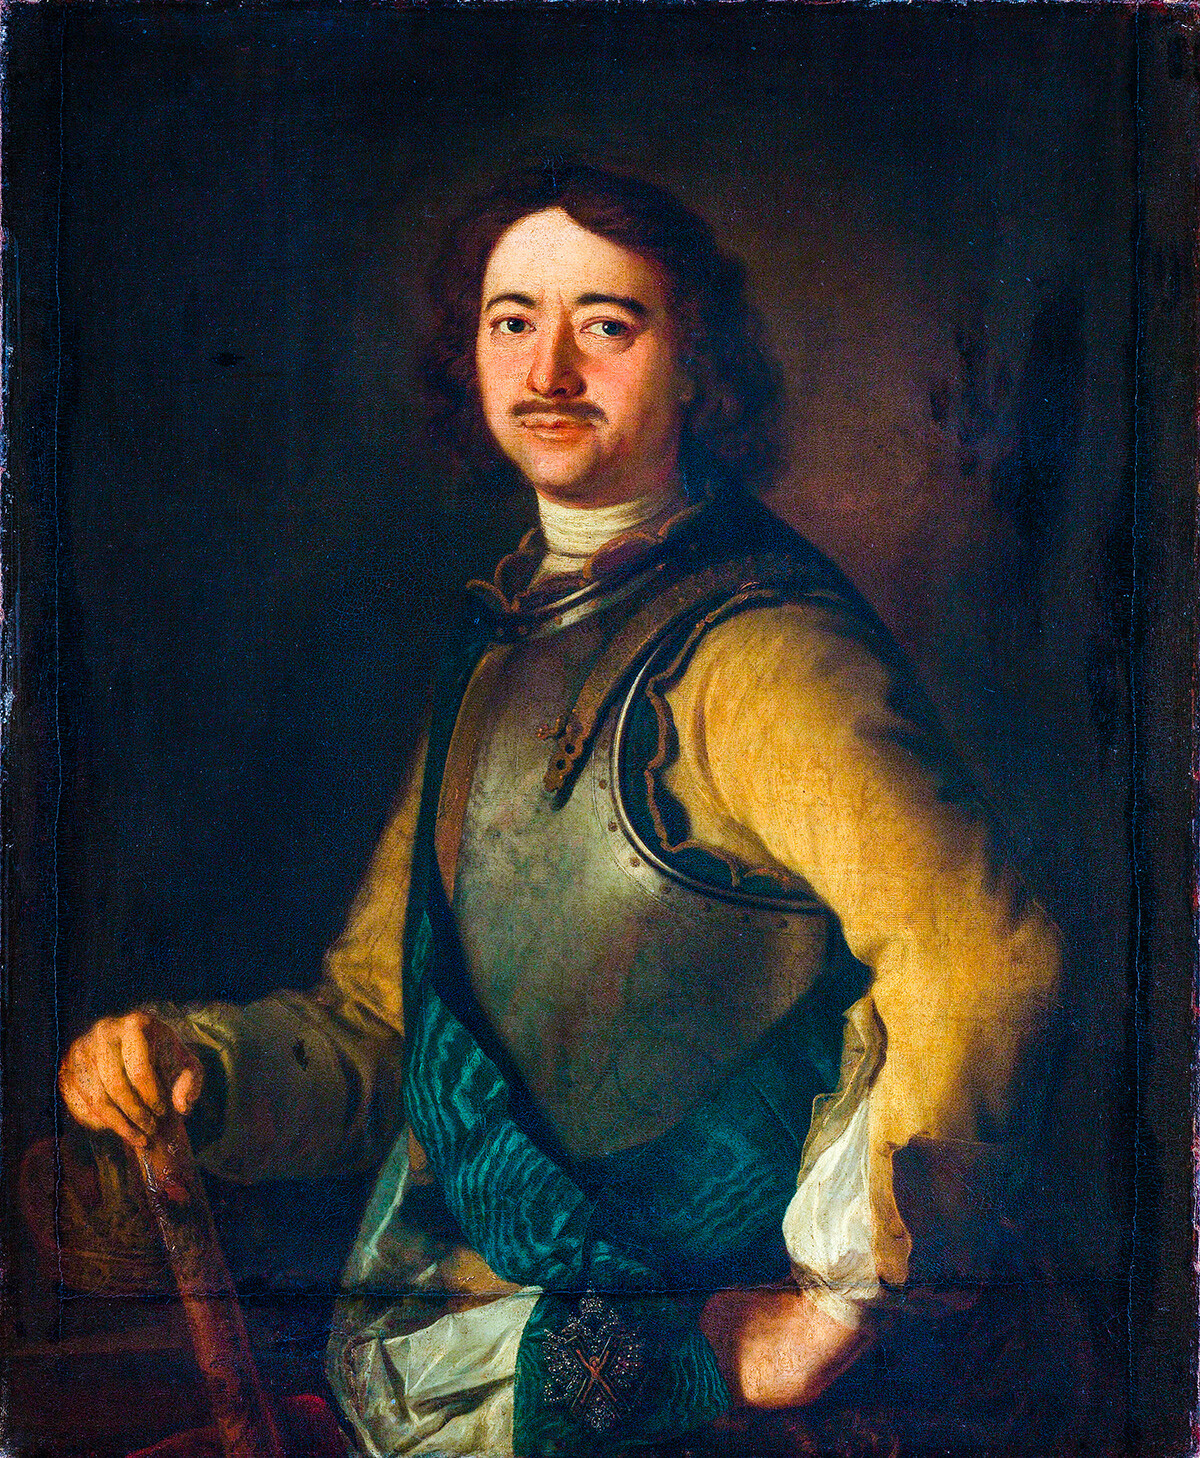 Tsar Peter The Great Of Russia, portrait, 1700-1750